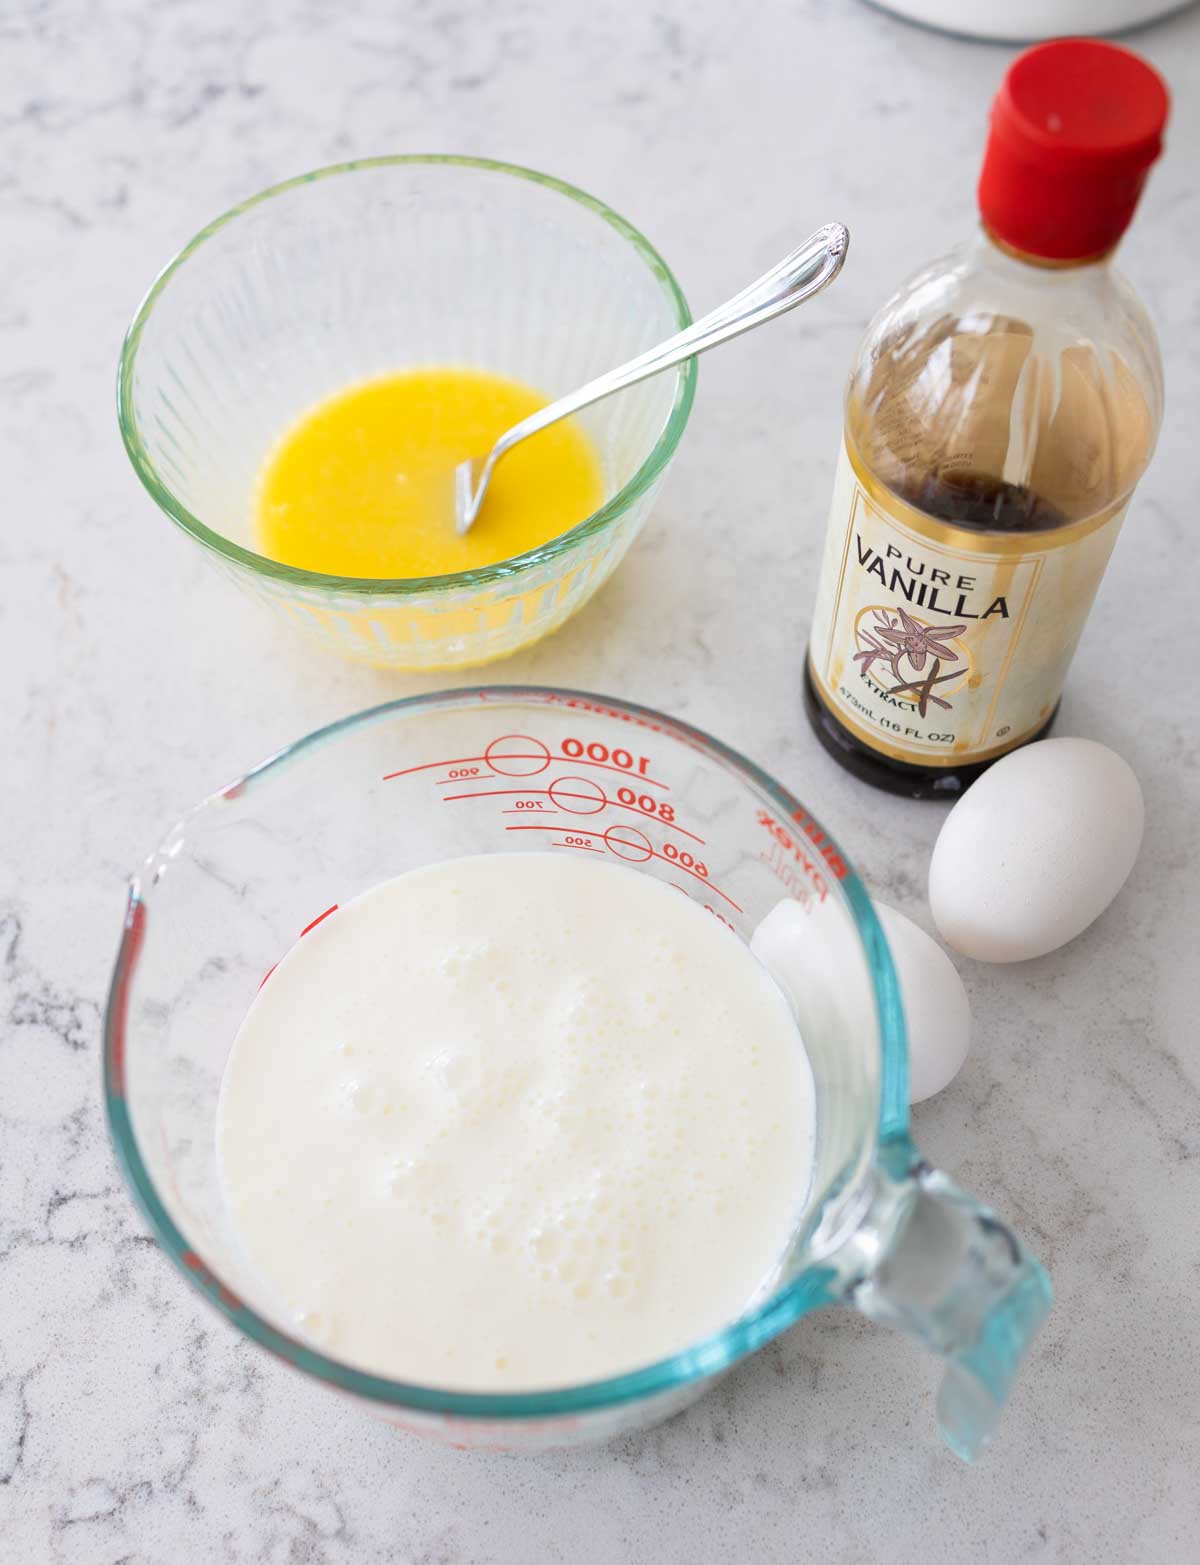 The buttermilk, eggs, melted butter, and vanilla are about to be mixed in a bowl.